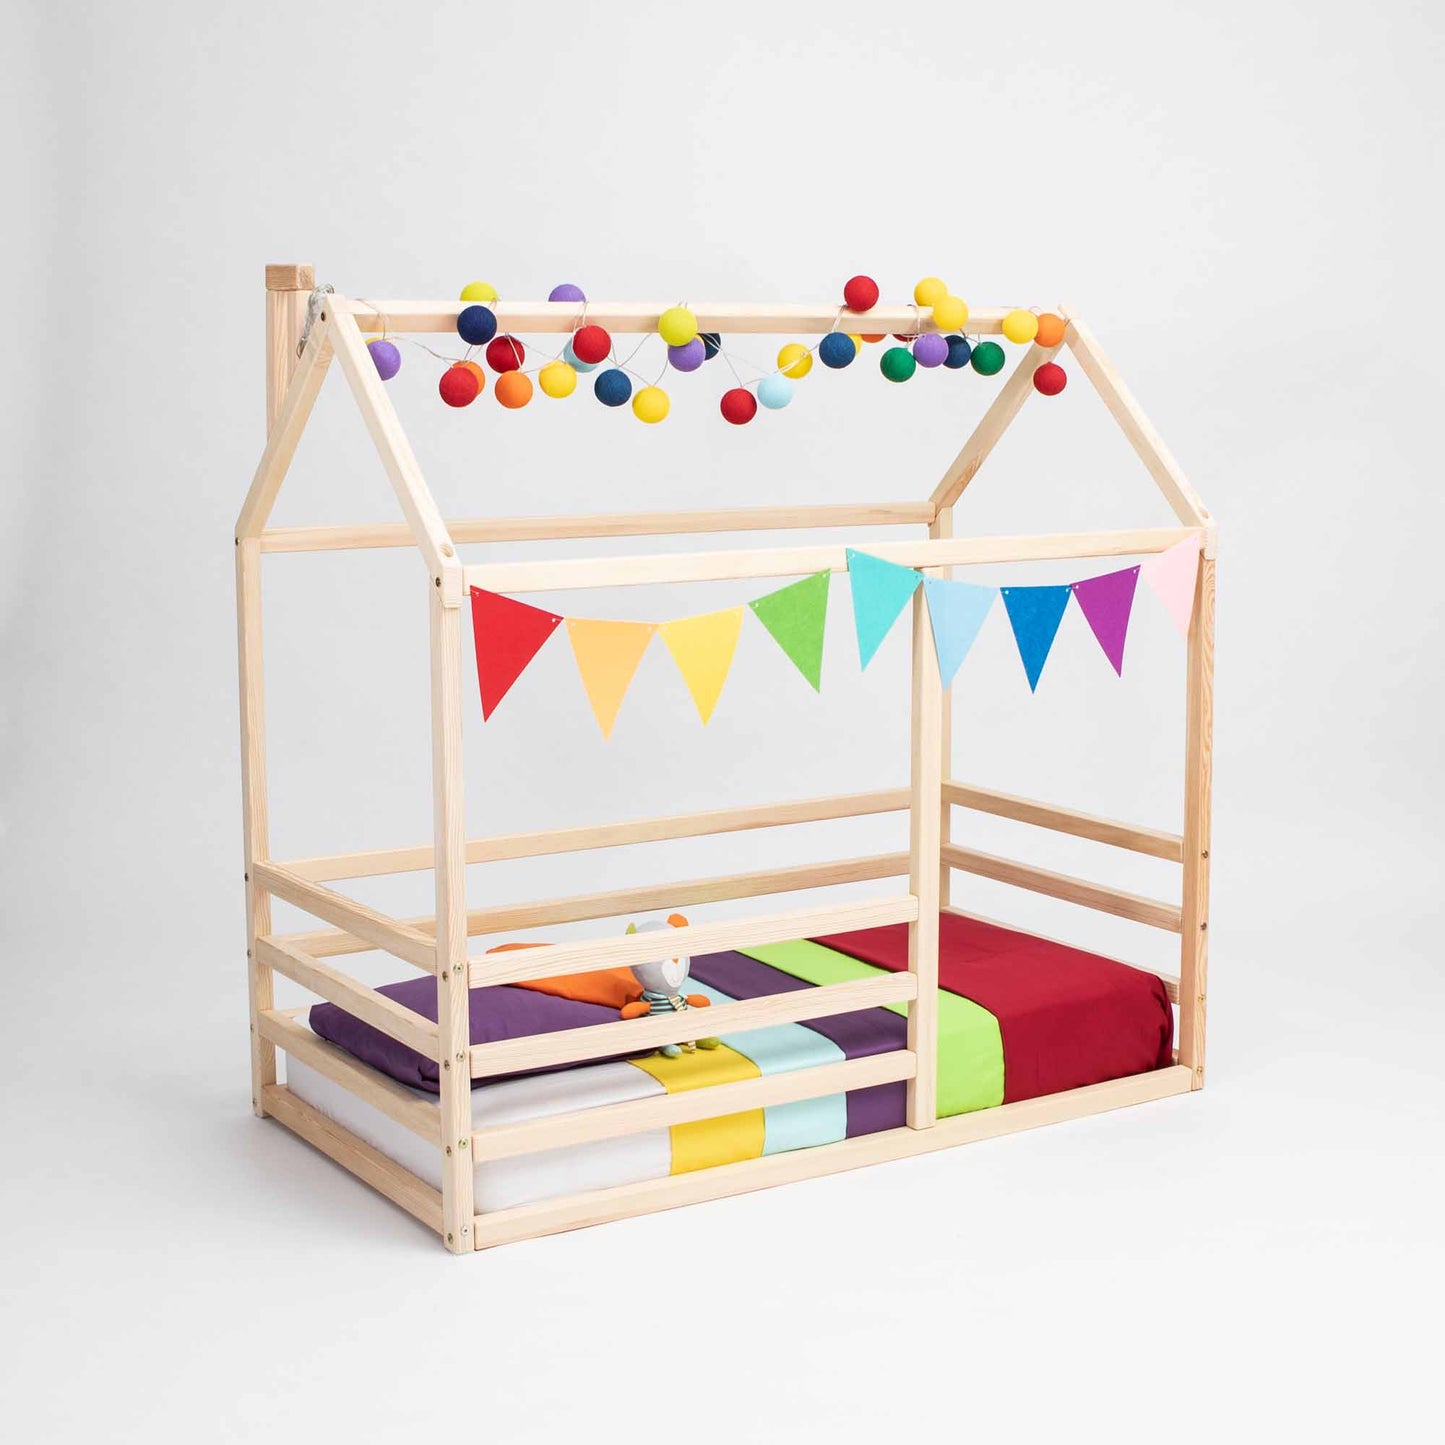 A floor level house bed with a horizontal fence, resembling a wooden house-shaped frame adorned with colorful balls and triangular banners. Inside rests a multicolored mattress and pillows, making it the perfect preschool bed for imagination and comfort.